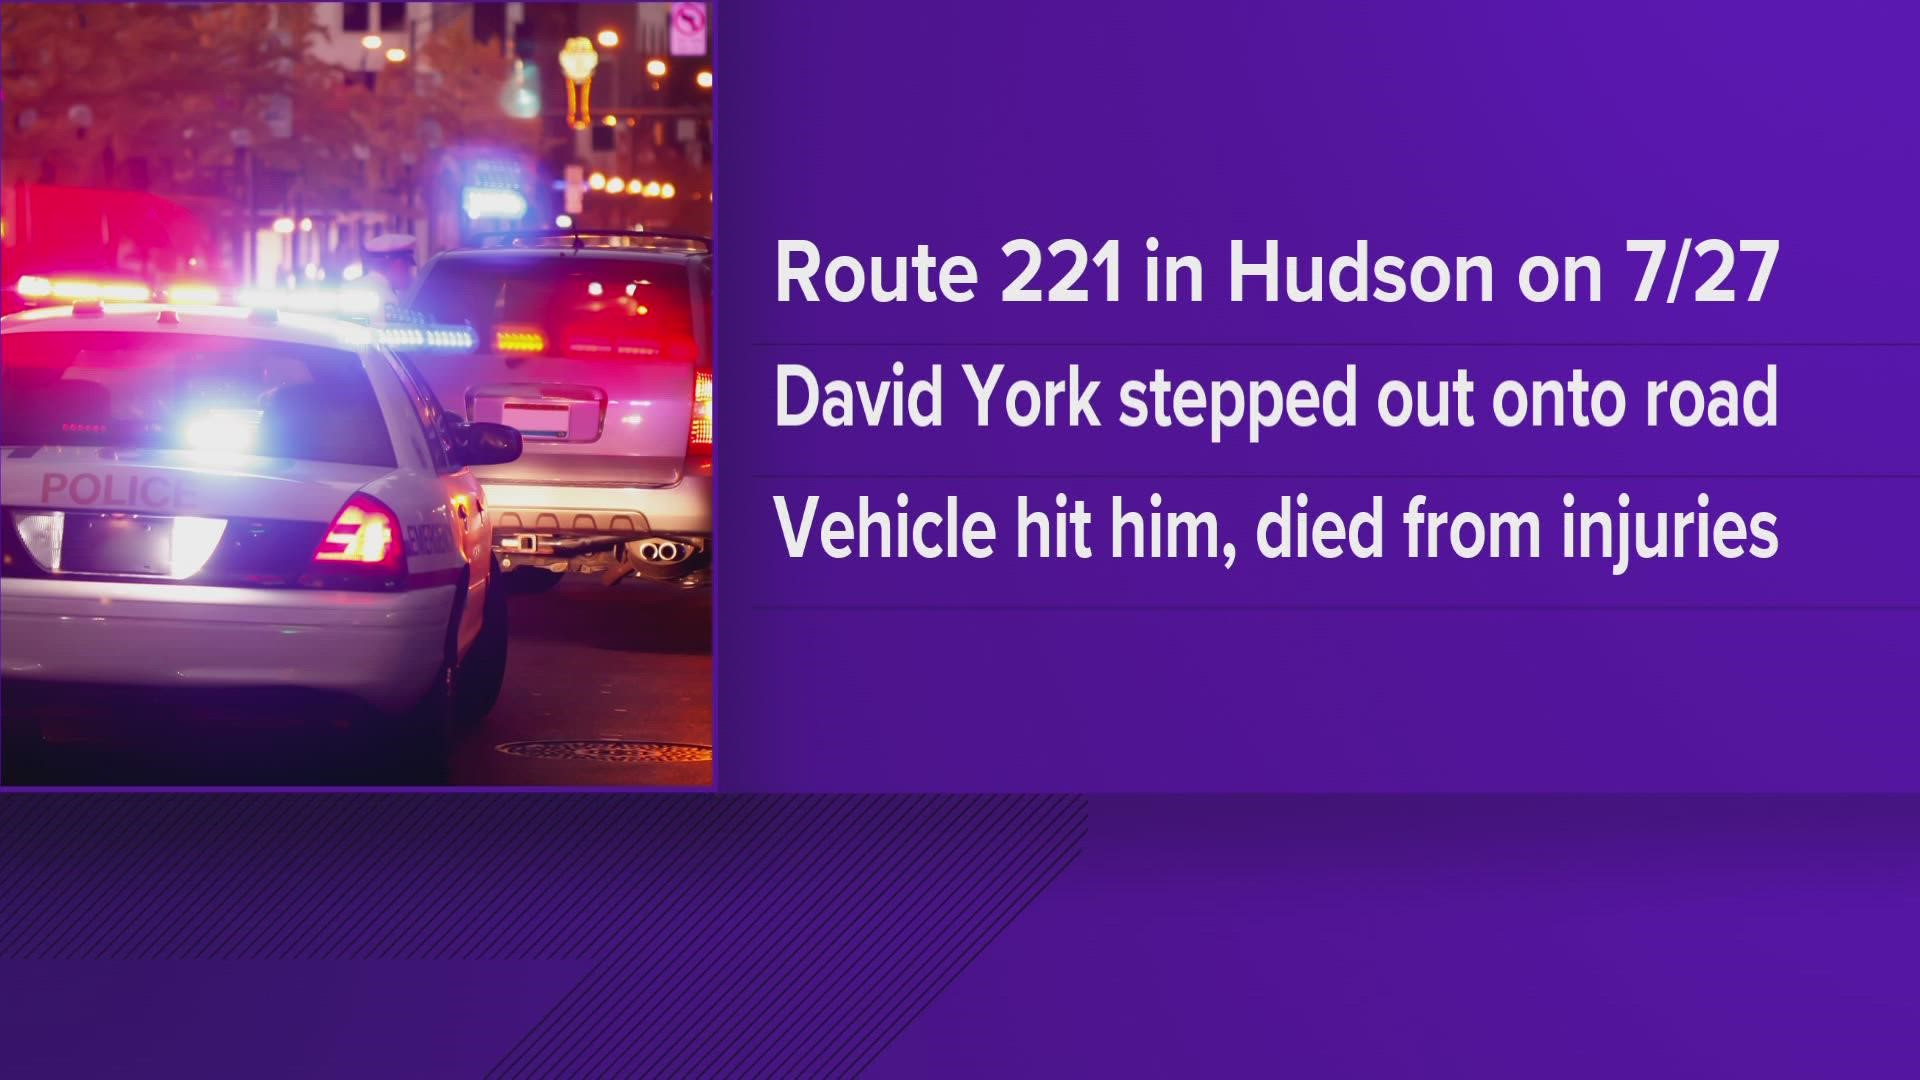 The crash took place on Wednesday on Maine State Route 221, according to authorities.